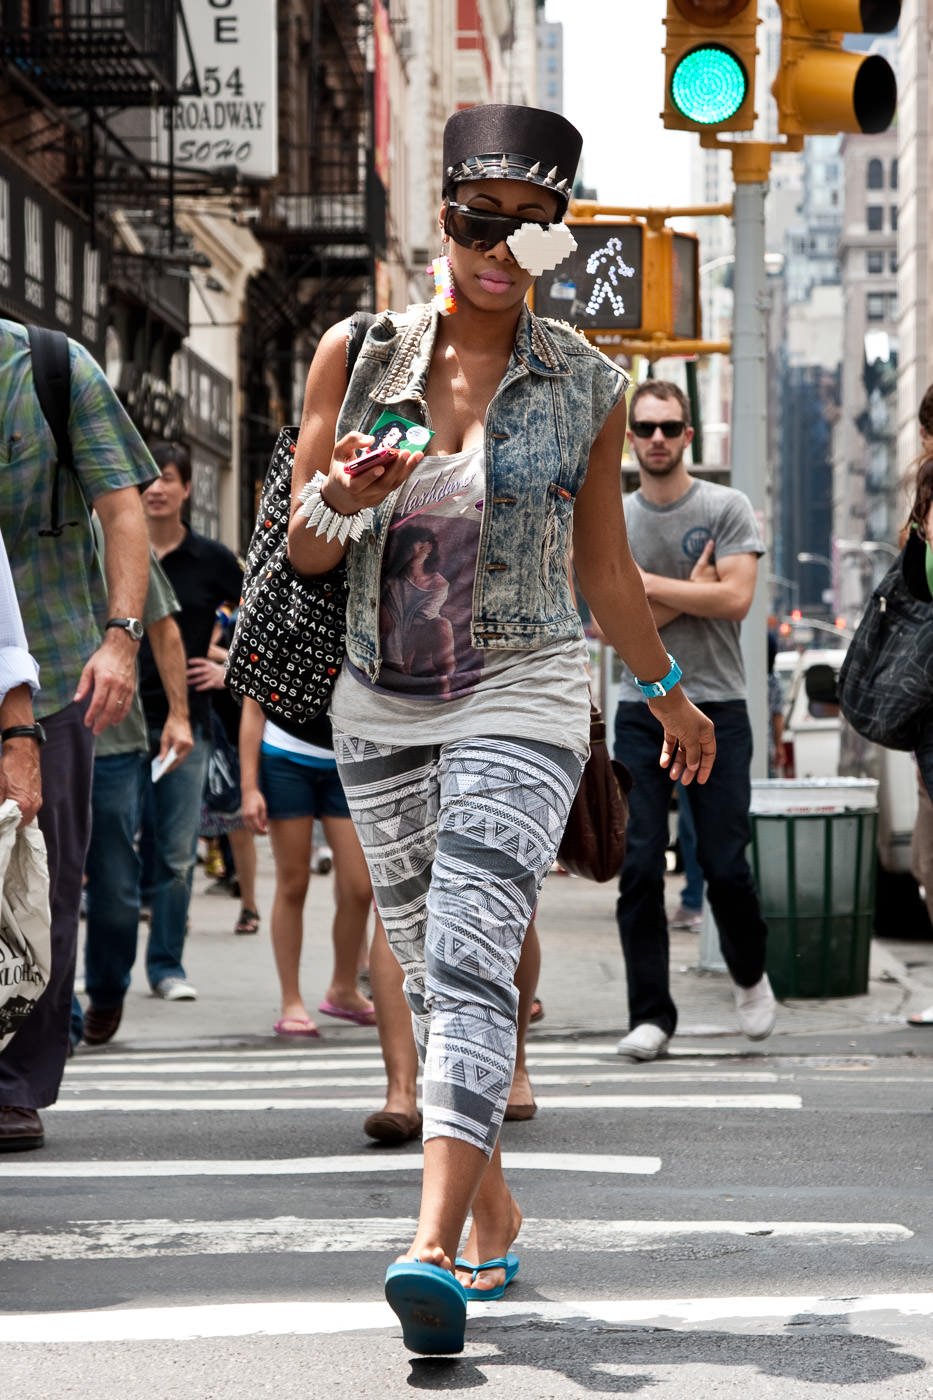 Street photography: Flamboyantly dressed woman crossing the street